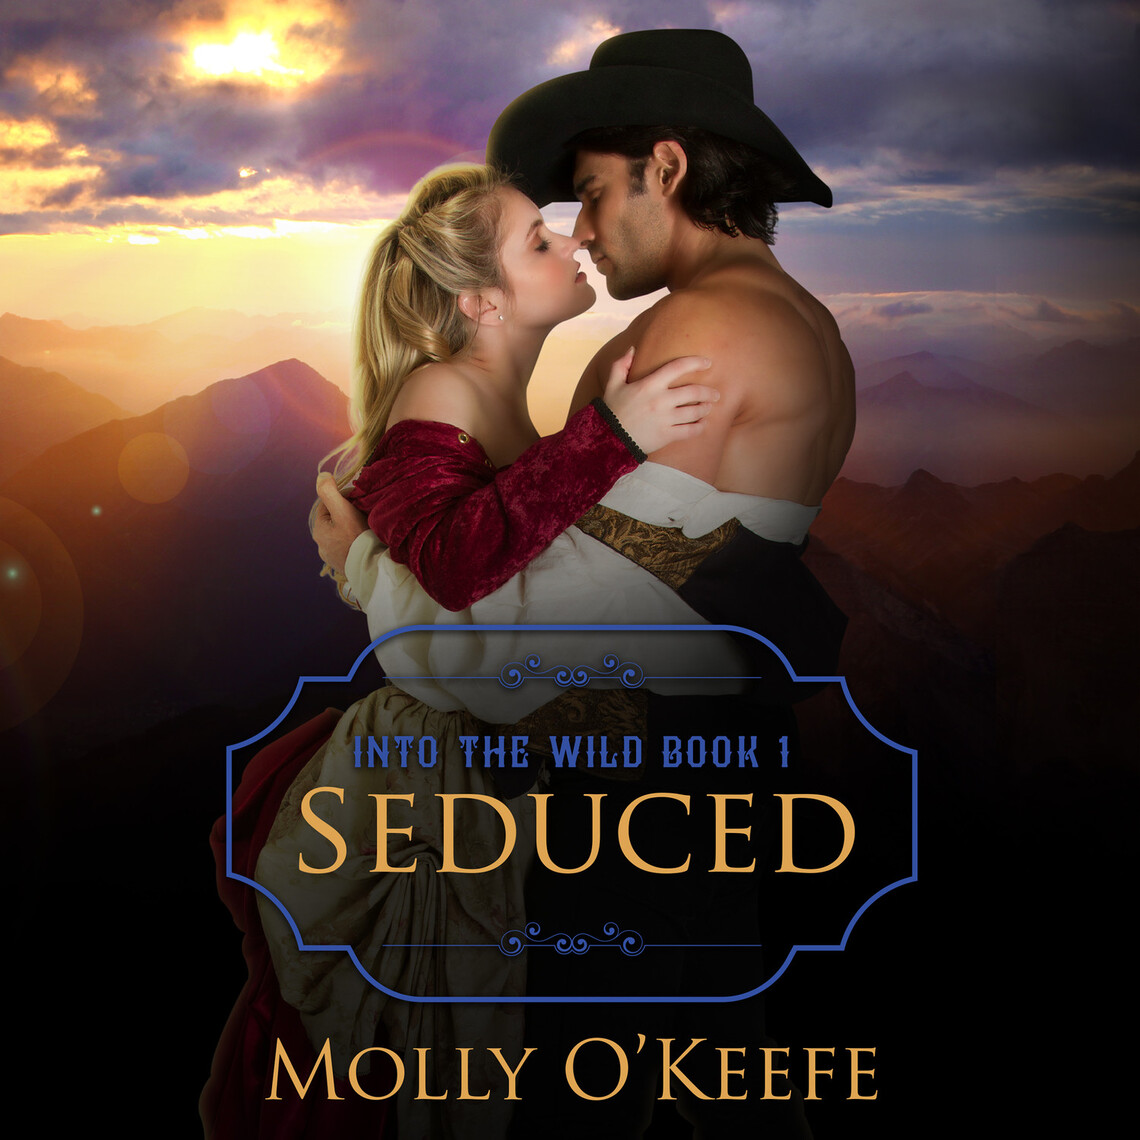 Seduced by Molly OKeefe picture image